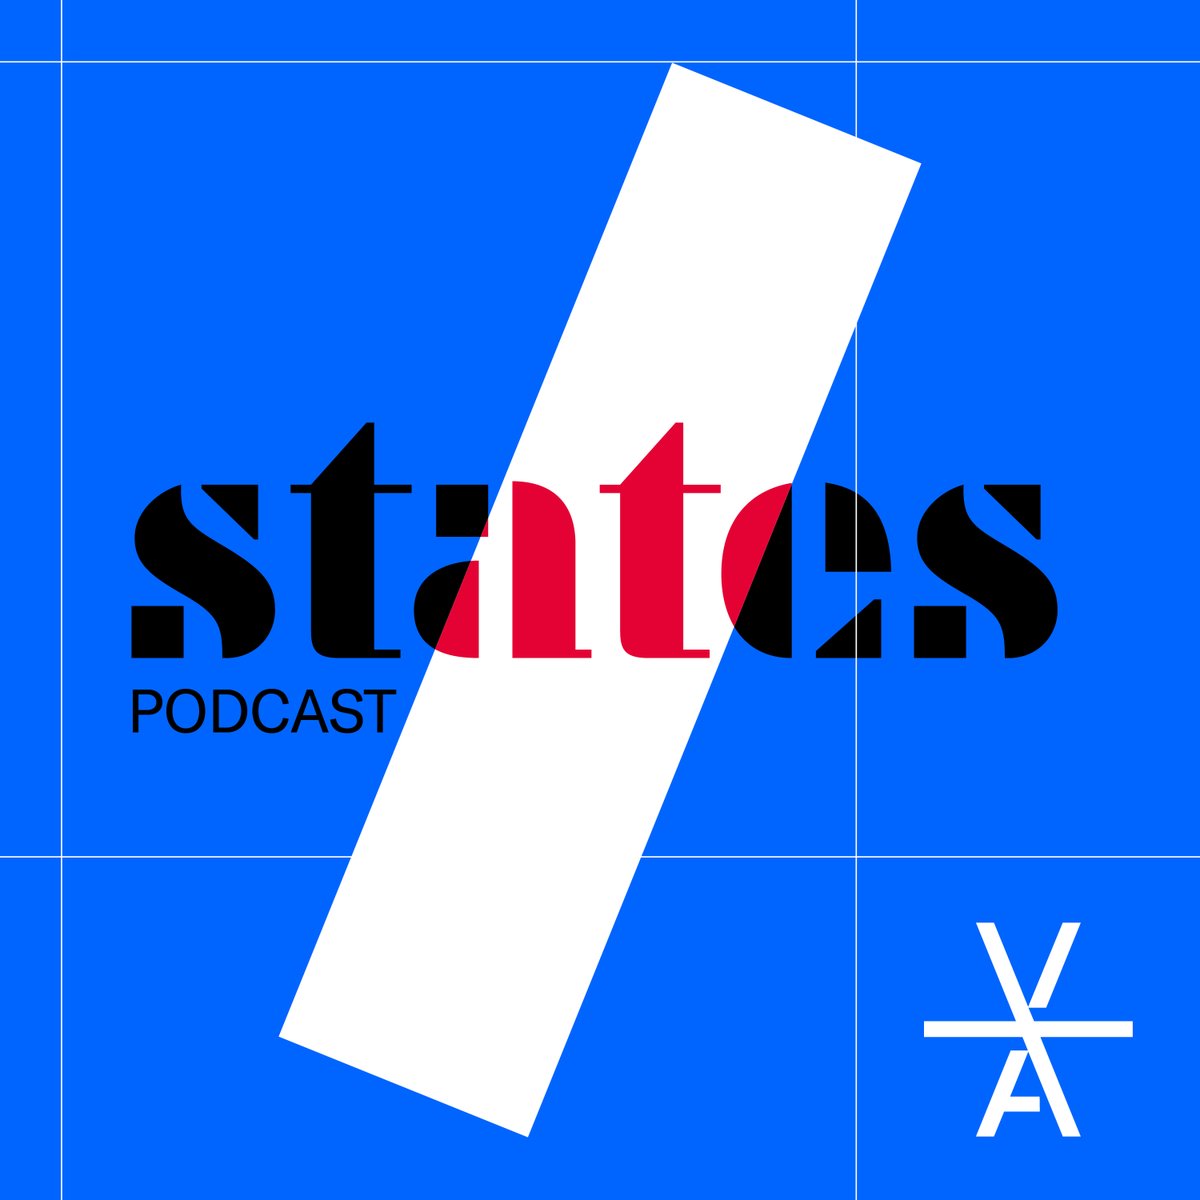 Introducing States podcast: a new platform by @villa_albertine exploring the intricacies of the current US cultural landscape. States' first series, Coast to Coast, conversations with Villa Albertine Residents, hosted by @RachelDonadio, is available now: bit.ly/3PaAQyO